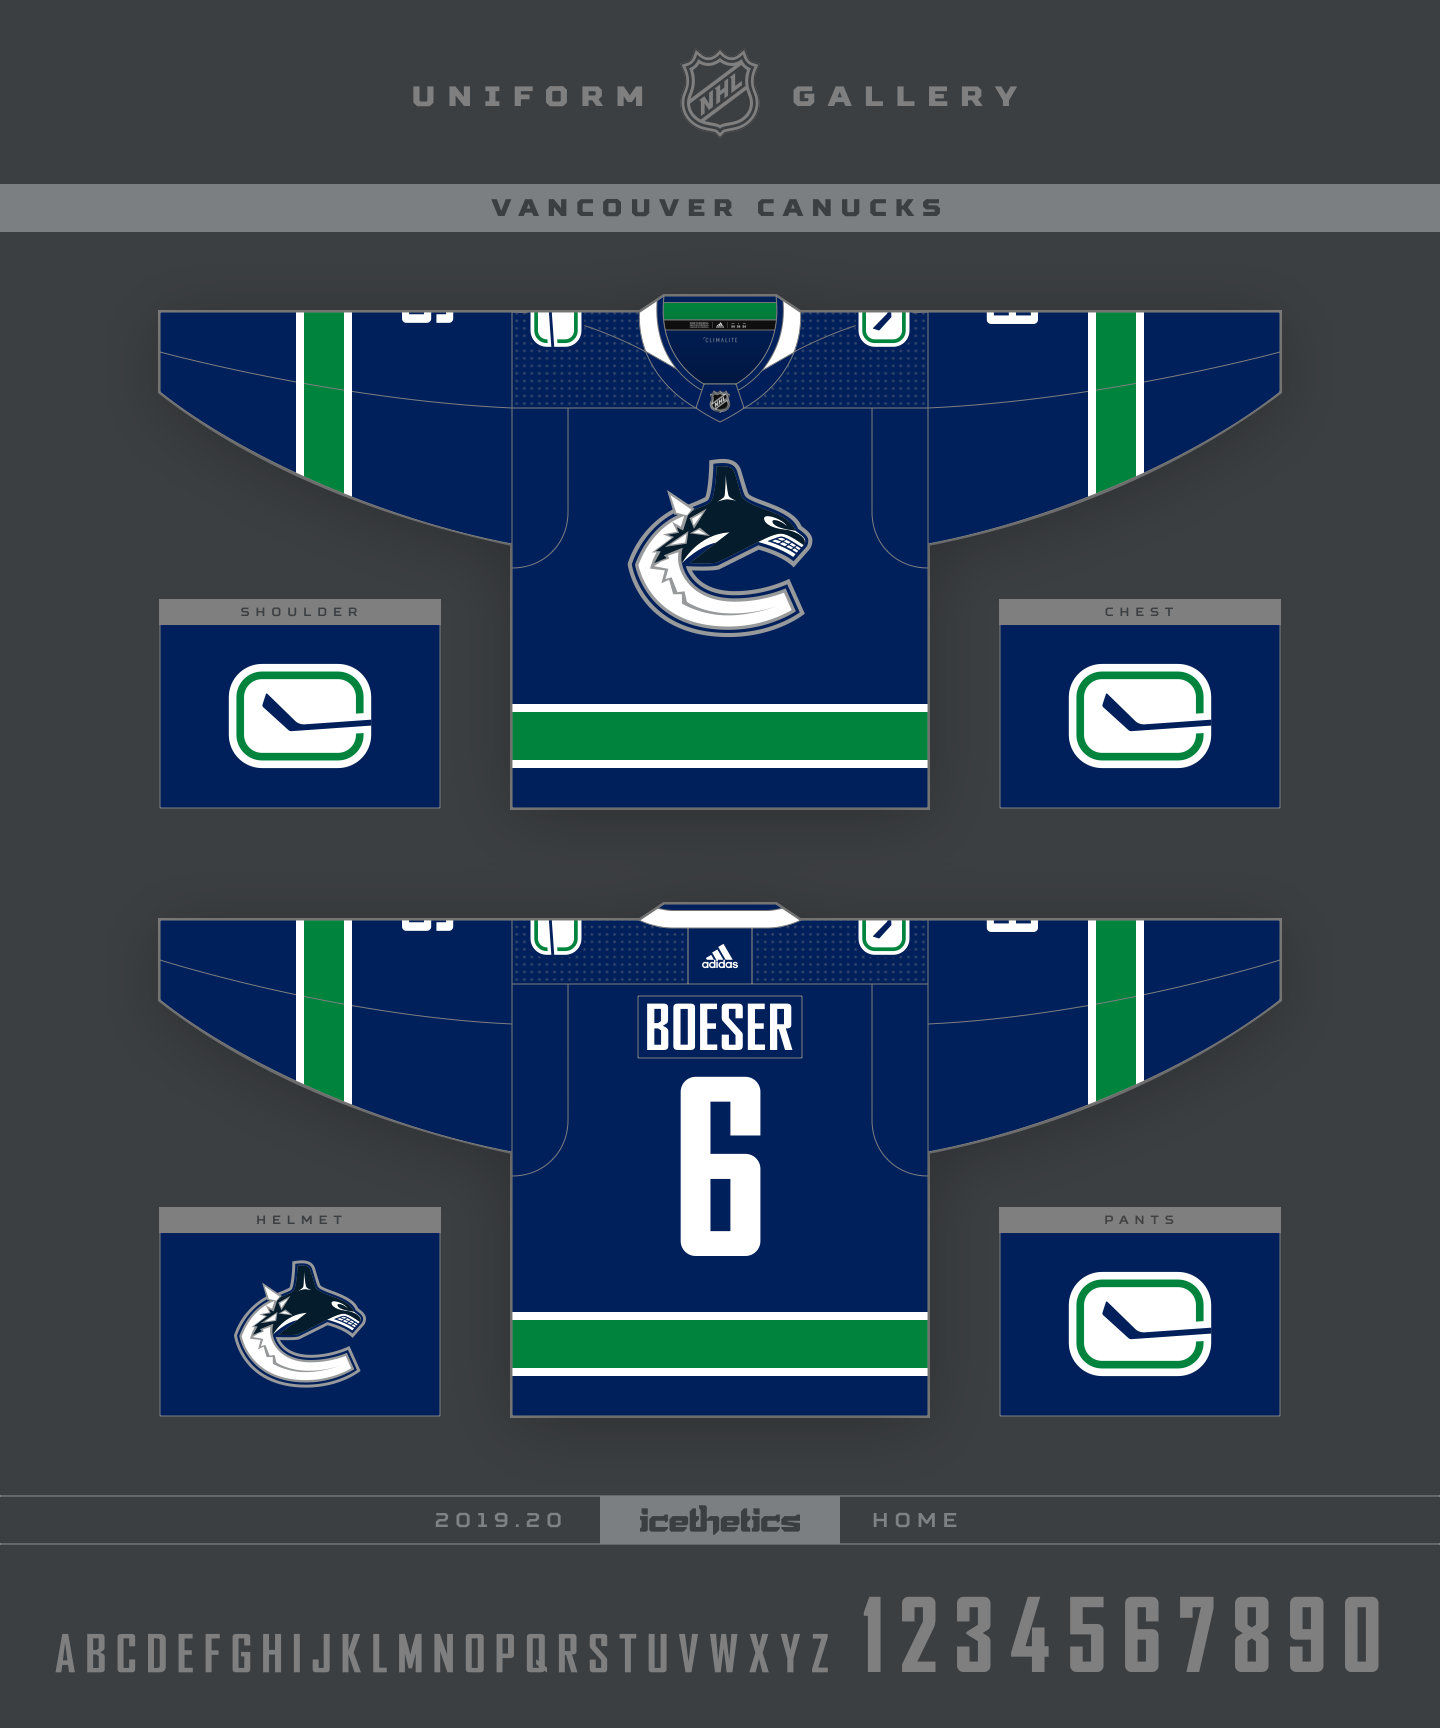 smithxdesign on X: The Winter Classic we all wanted! Canucks Vs Kraken  ❄️🎨 Retweet if you want to see this matchup next year #canucks fans!! Had  fun making these jersey concepts!! #SMSports #